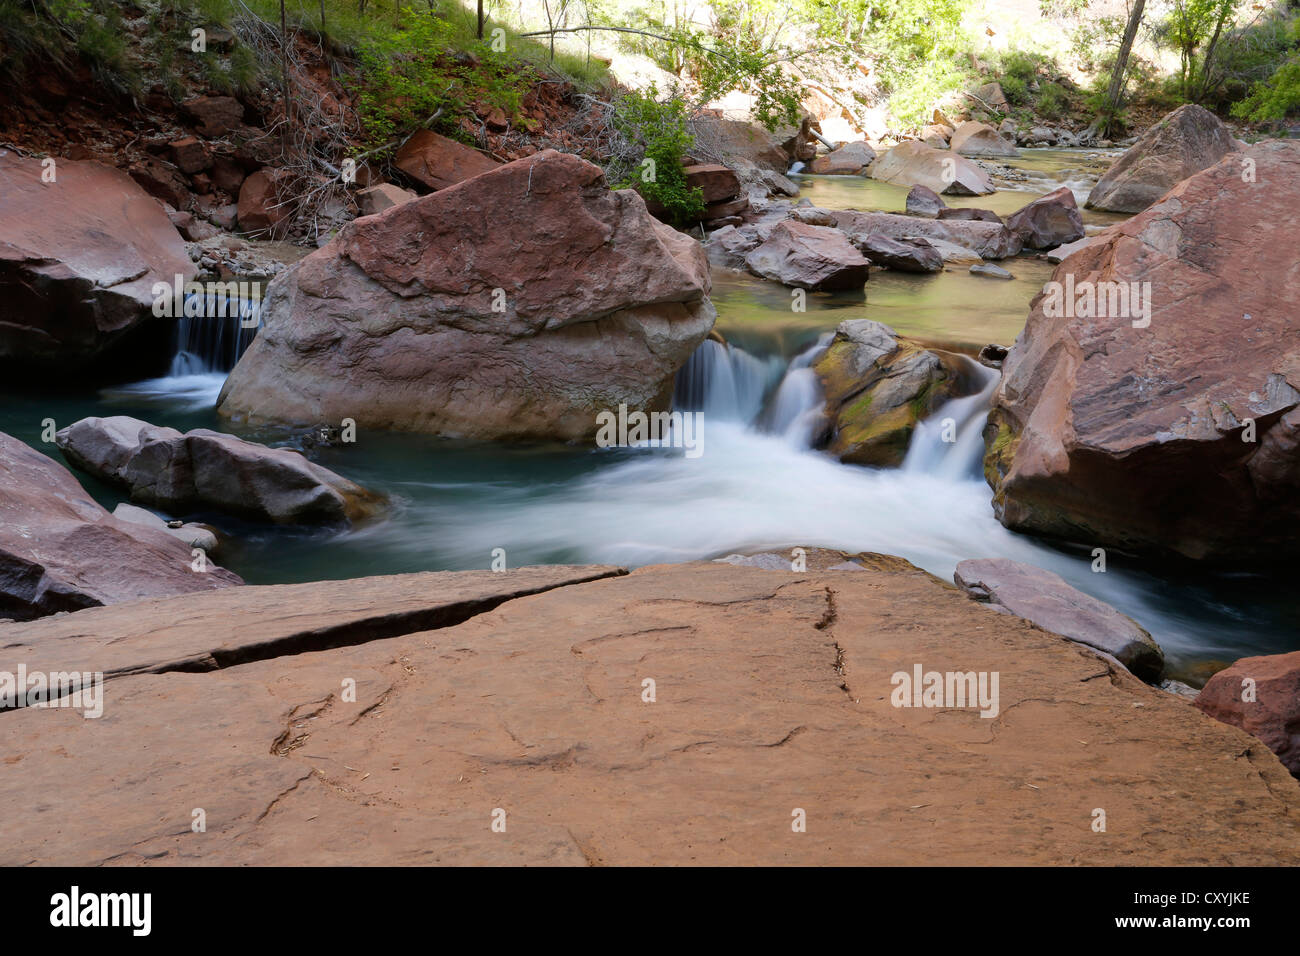 Rapids in the Virgin River, Zion Canyon National Park, Utah, USA Stock Photo